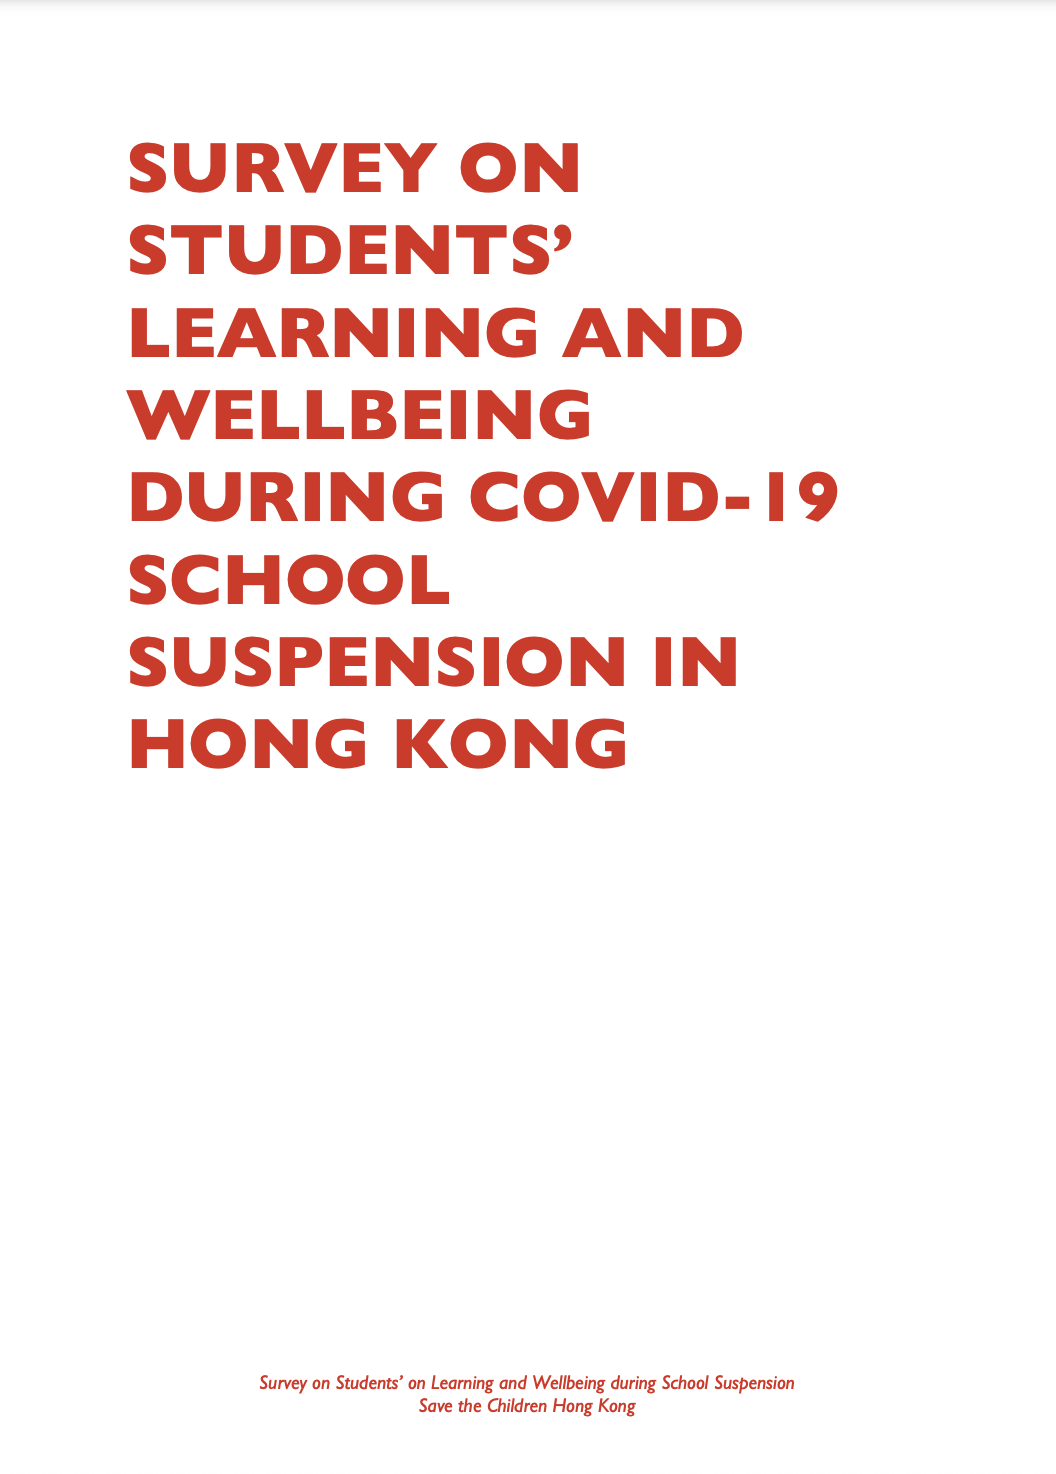 Detailed Survey Results Summary of Survey on Students’ Learning and Wellbeing during COVID-19 School Suspension in Hong Kong